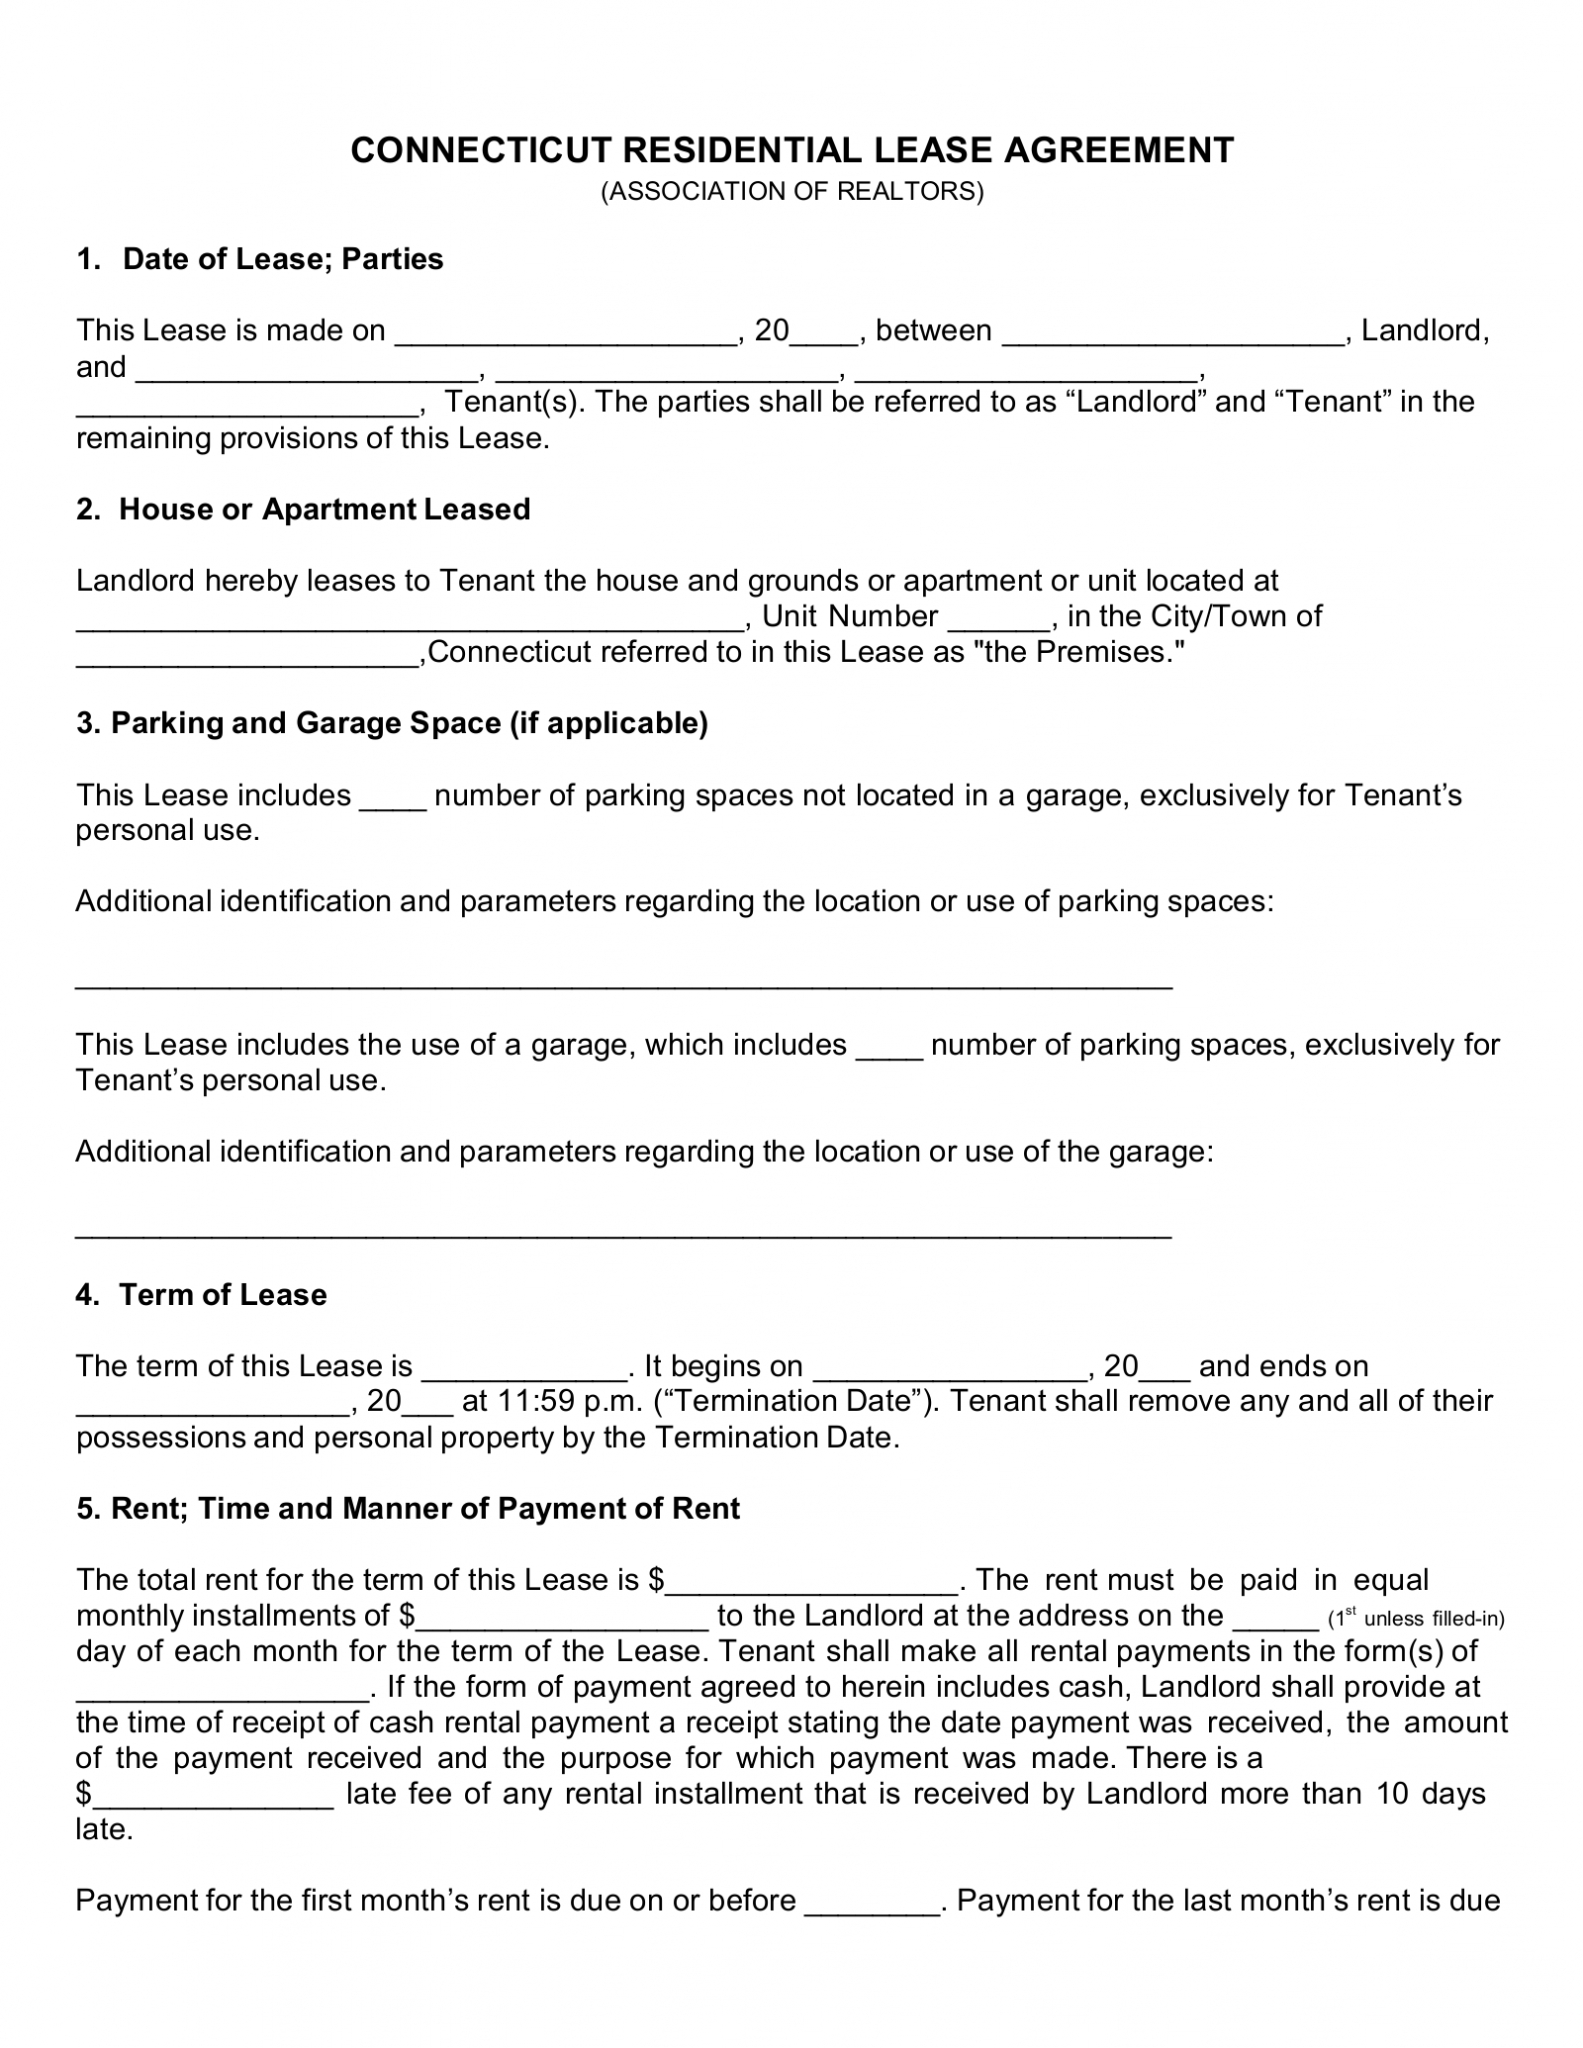 Free Connecticut Association Of Realtors Residential Lease Agreement regarding Home Rules Contract Template